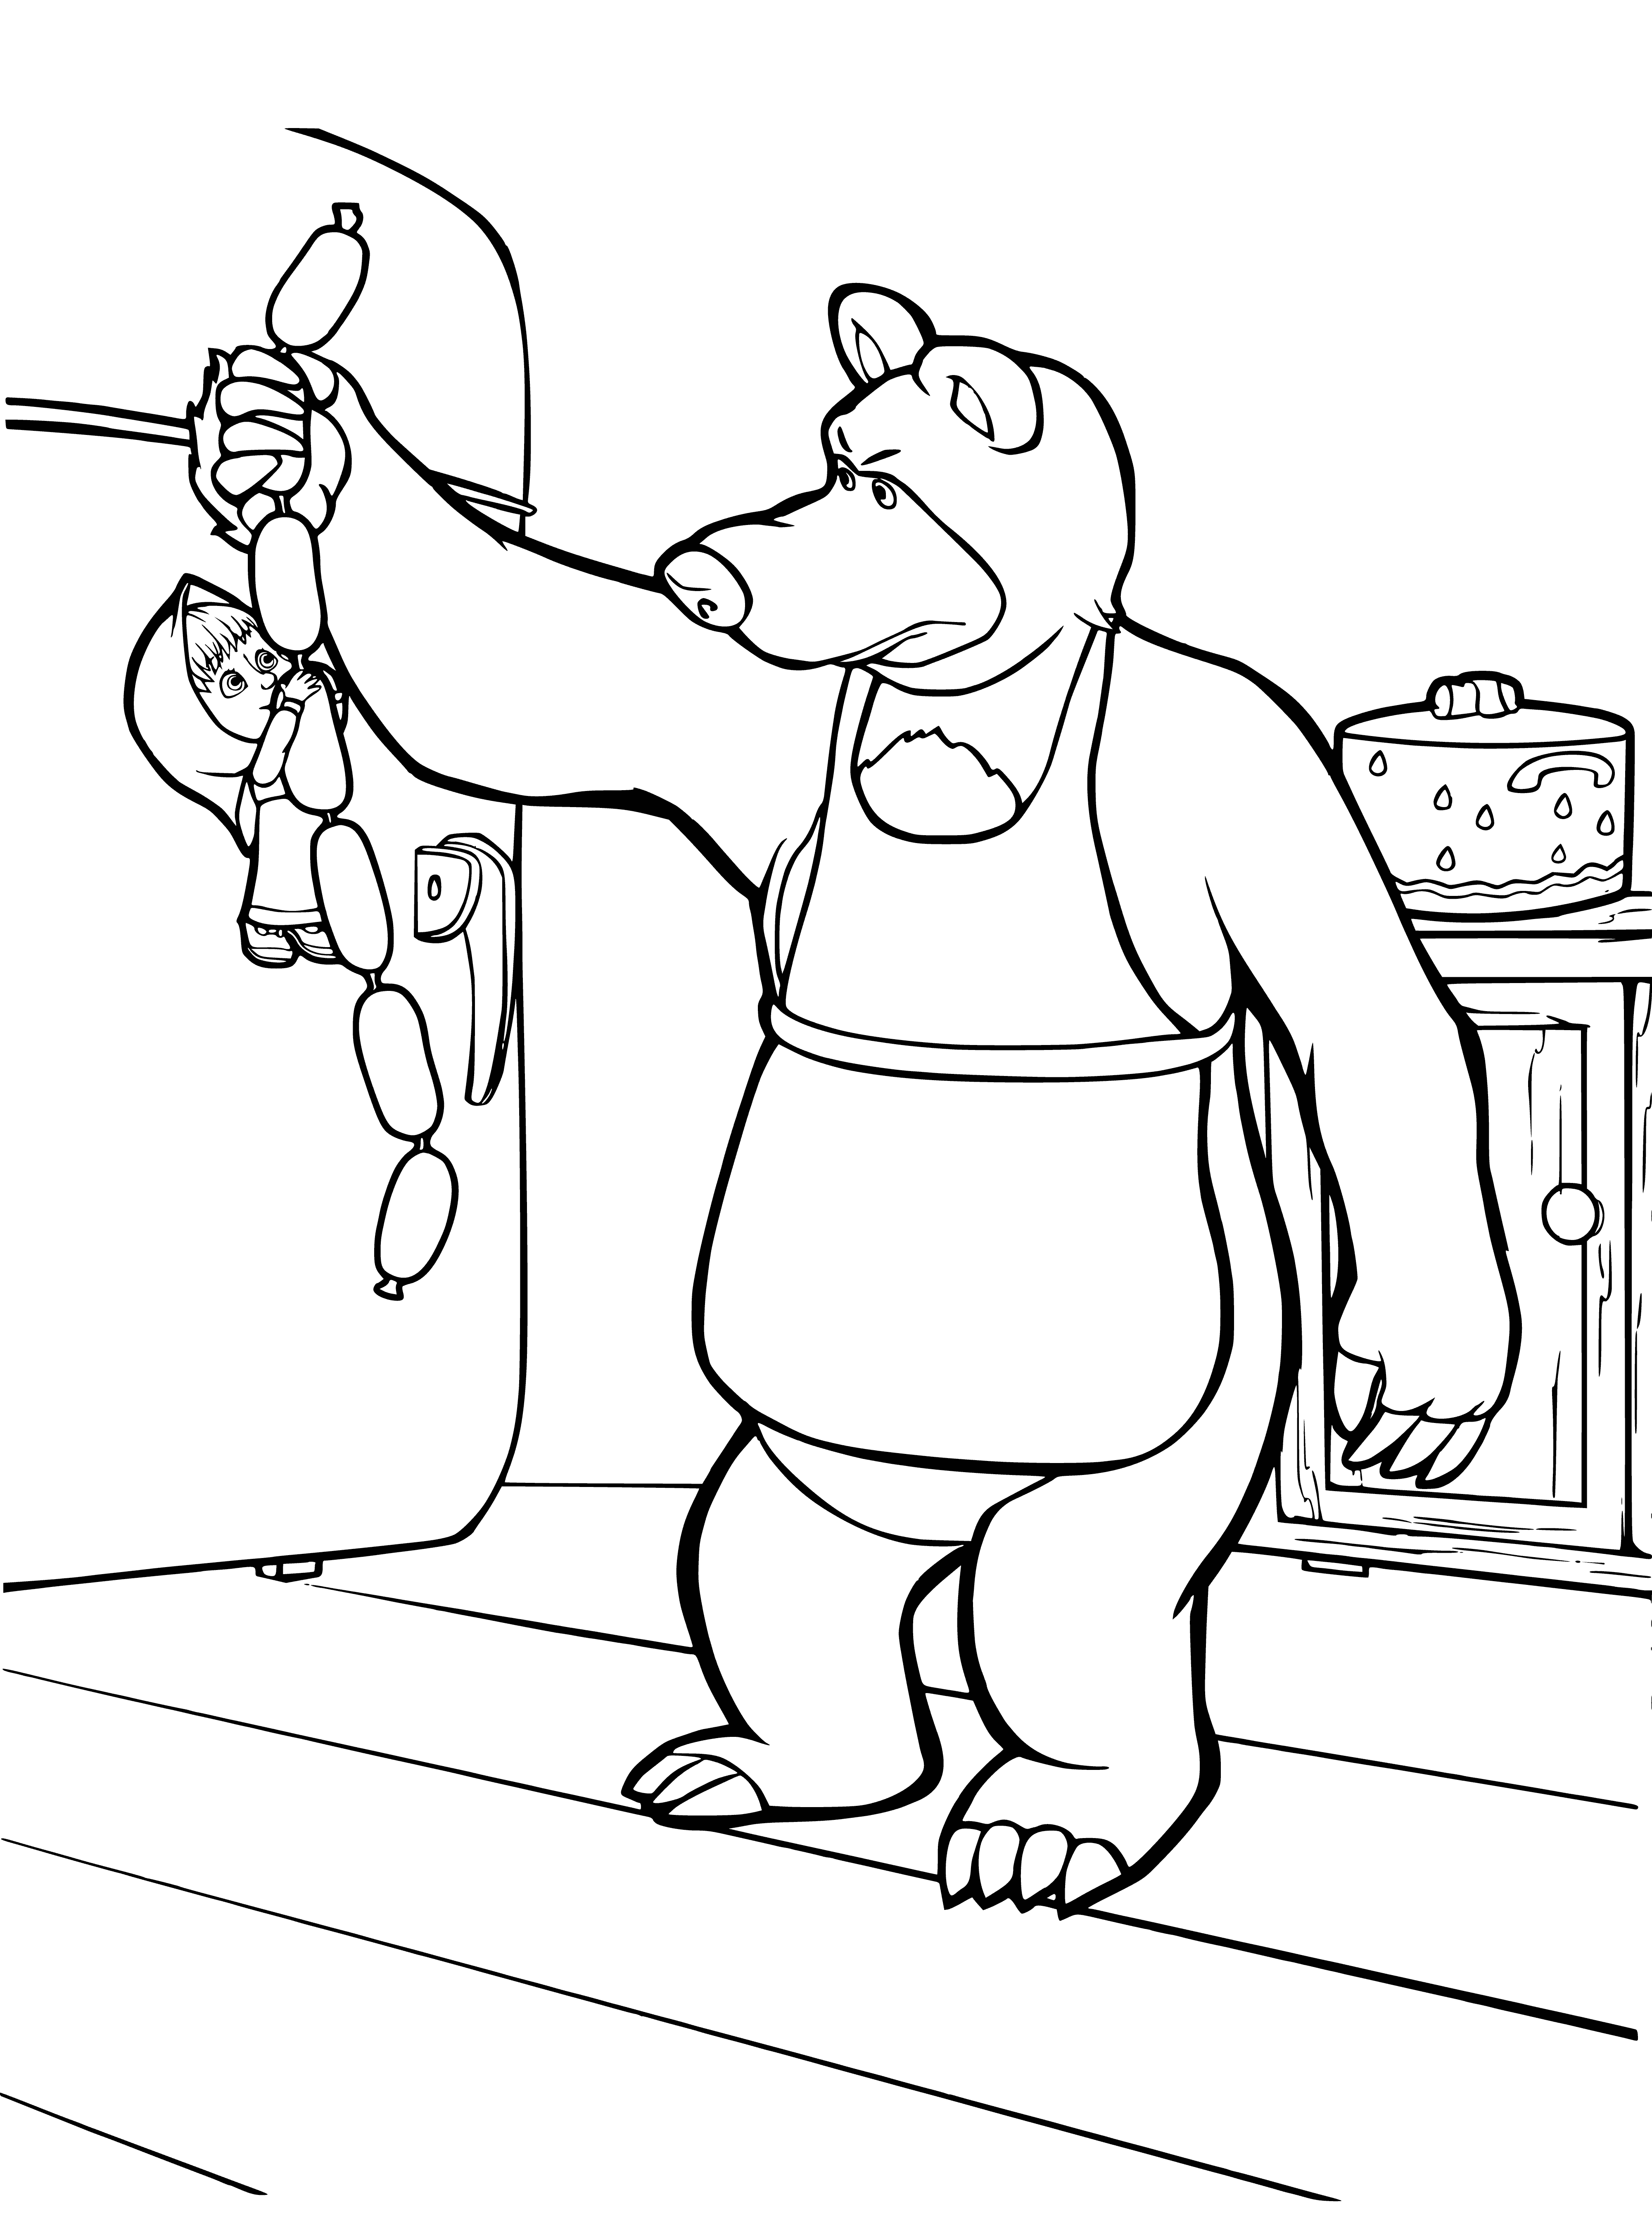 coloring page: Masha stands with sausages in hand, facing a huge bear ready to devour them.